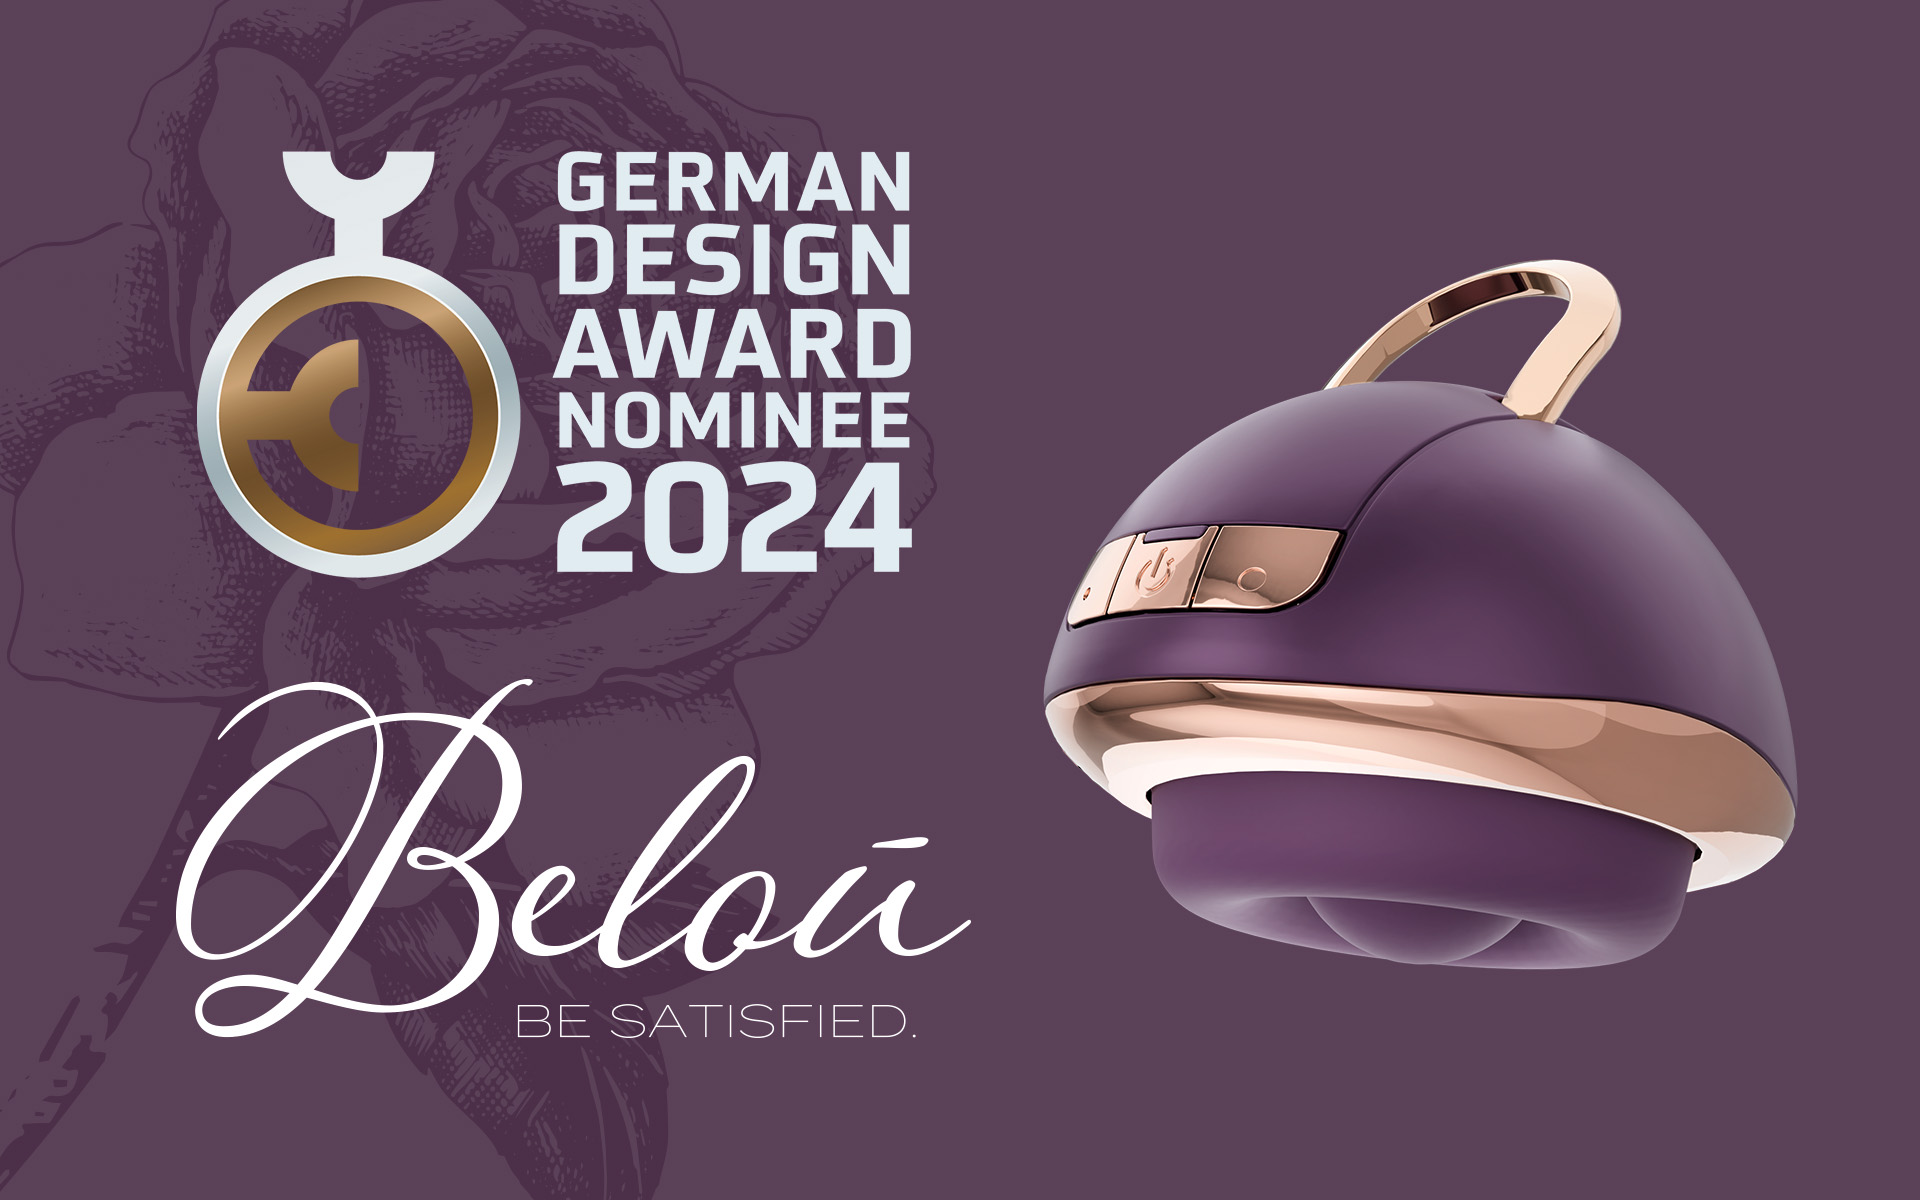 Sexual Wellness from ORION: Belou “Rotating Vulva Massager” nominated for the German Design Award 2024